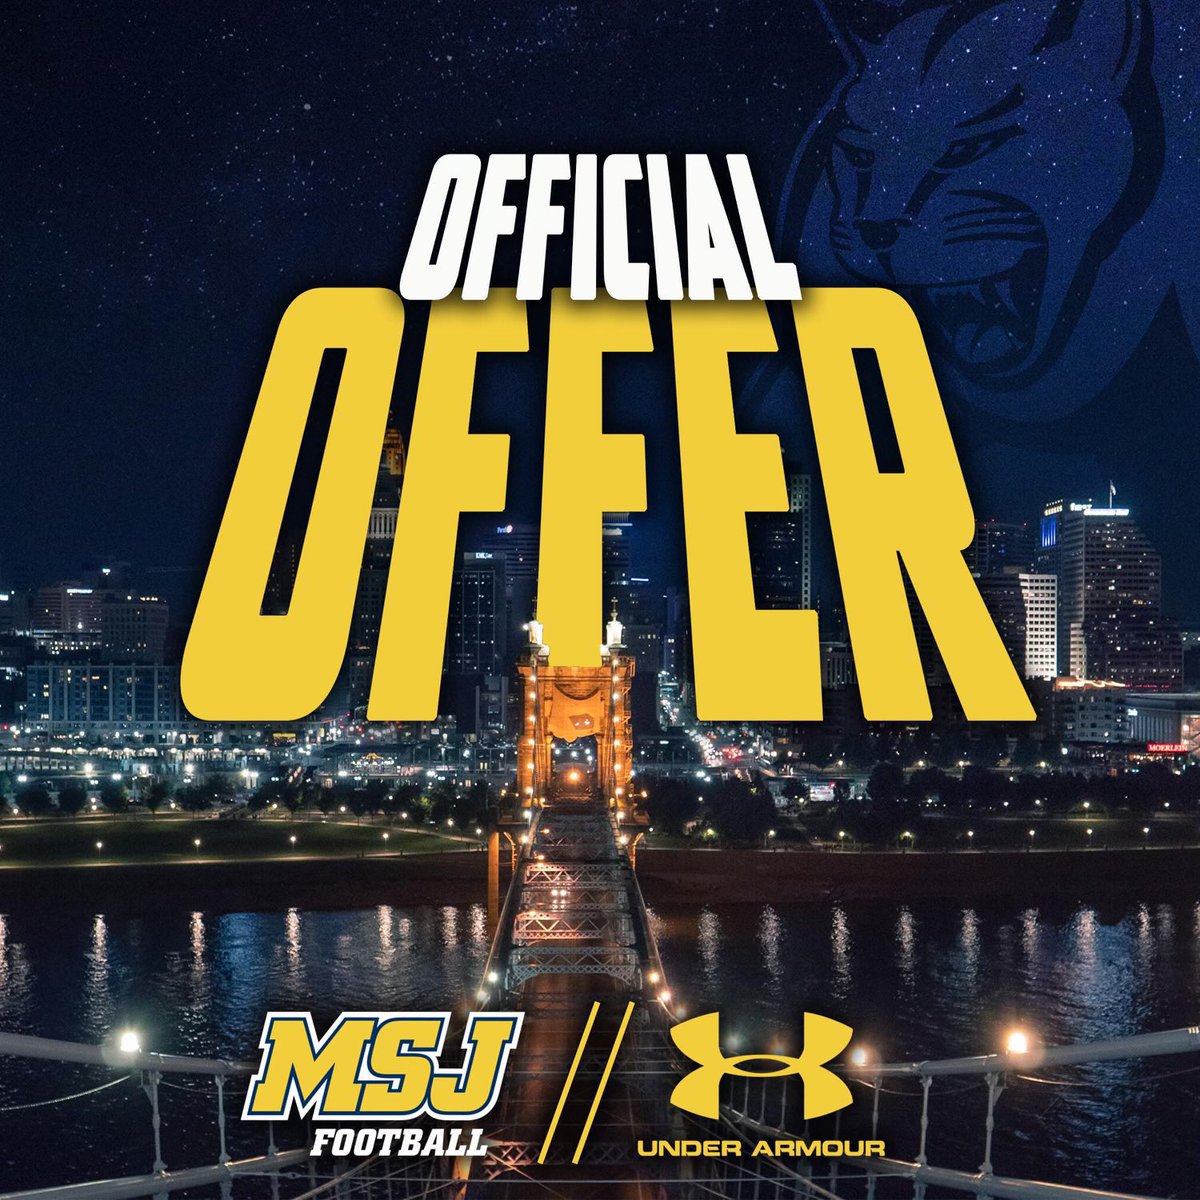 After a great conversation with @JT_FTF I'm blessed to receive an offer from Mount St. Joseph 🙏🏿 #GoLions 🦁
@GdaleHSFootball @RecruitTheDale @AL6AFootball @ChadEadsOL @CoachEadsGDale @CoachL__ @HallTechSports1 @UnLockYourGame @PrepRedzoneAL @DownSouthFb1 @AL_Recruiting